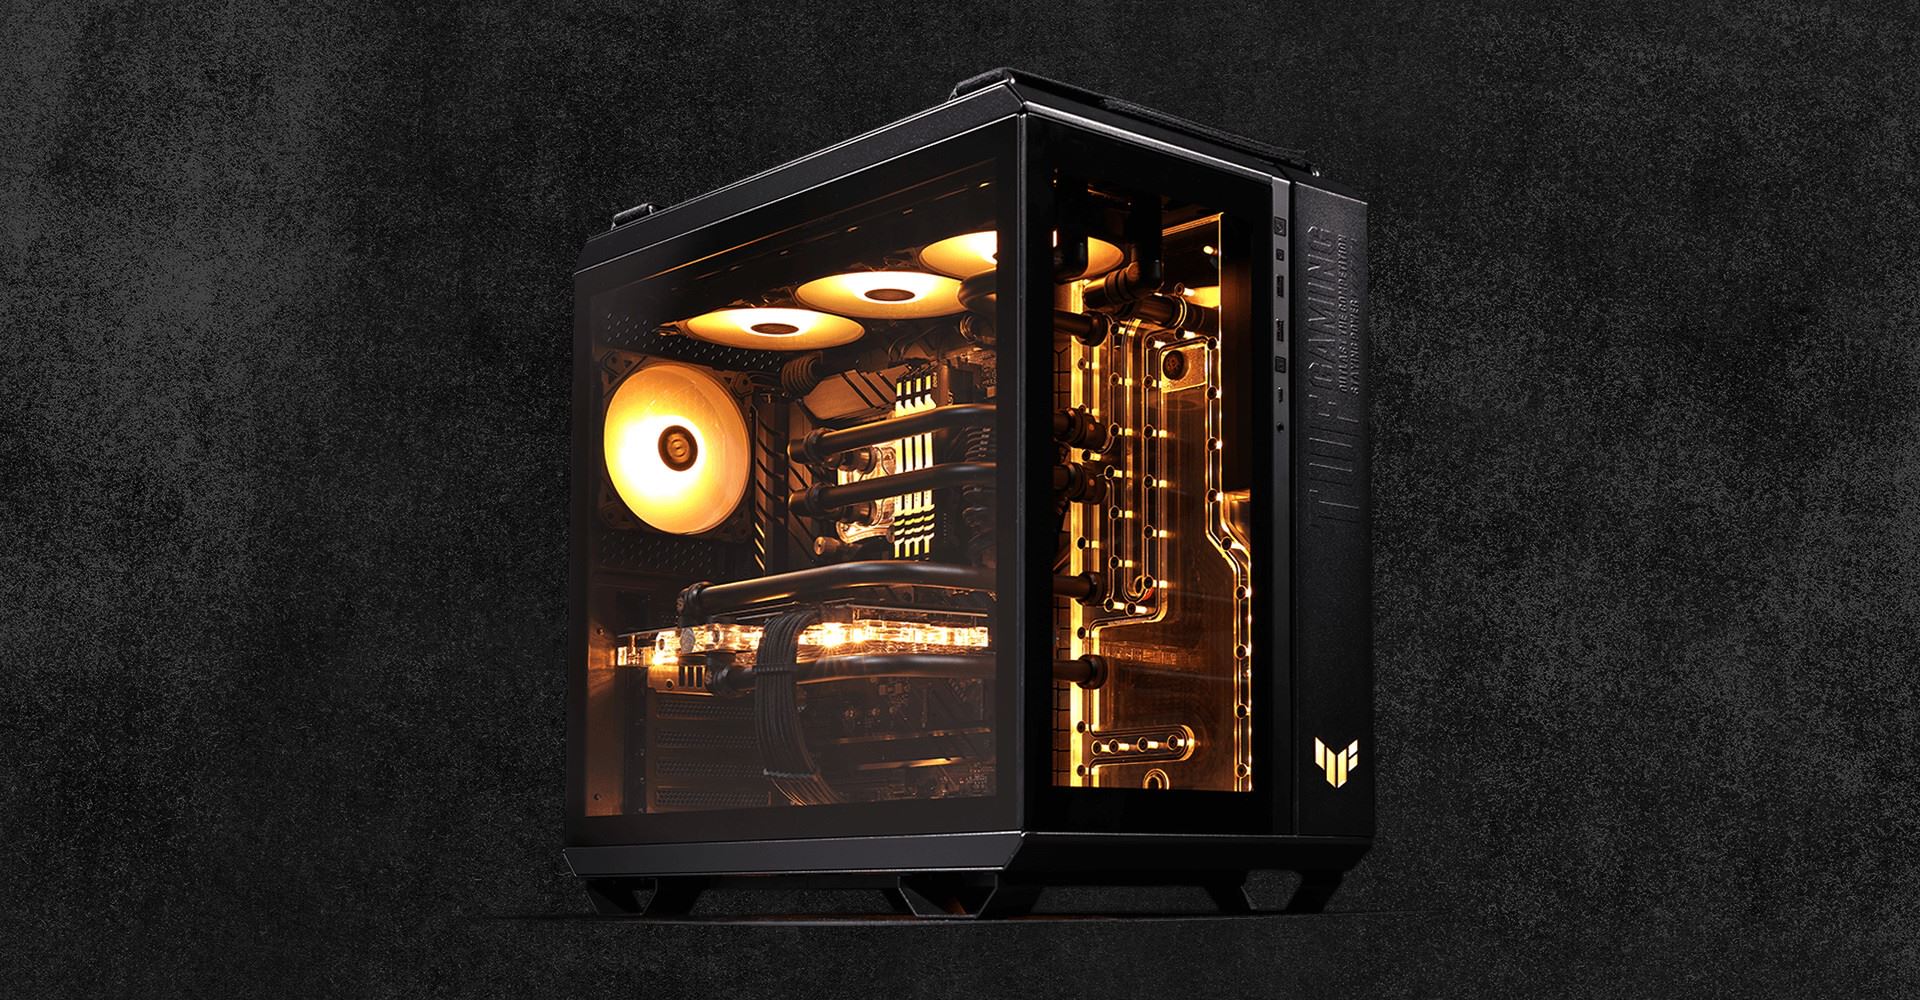 ASUS annuncia il case "dual chamber" TUF Gaming GT502